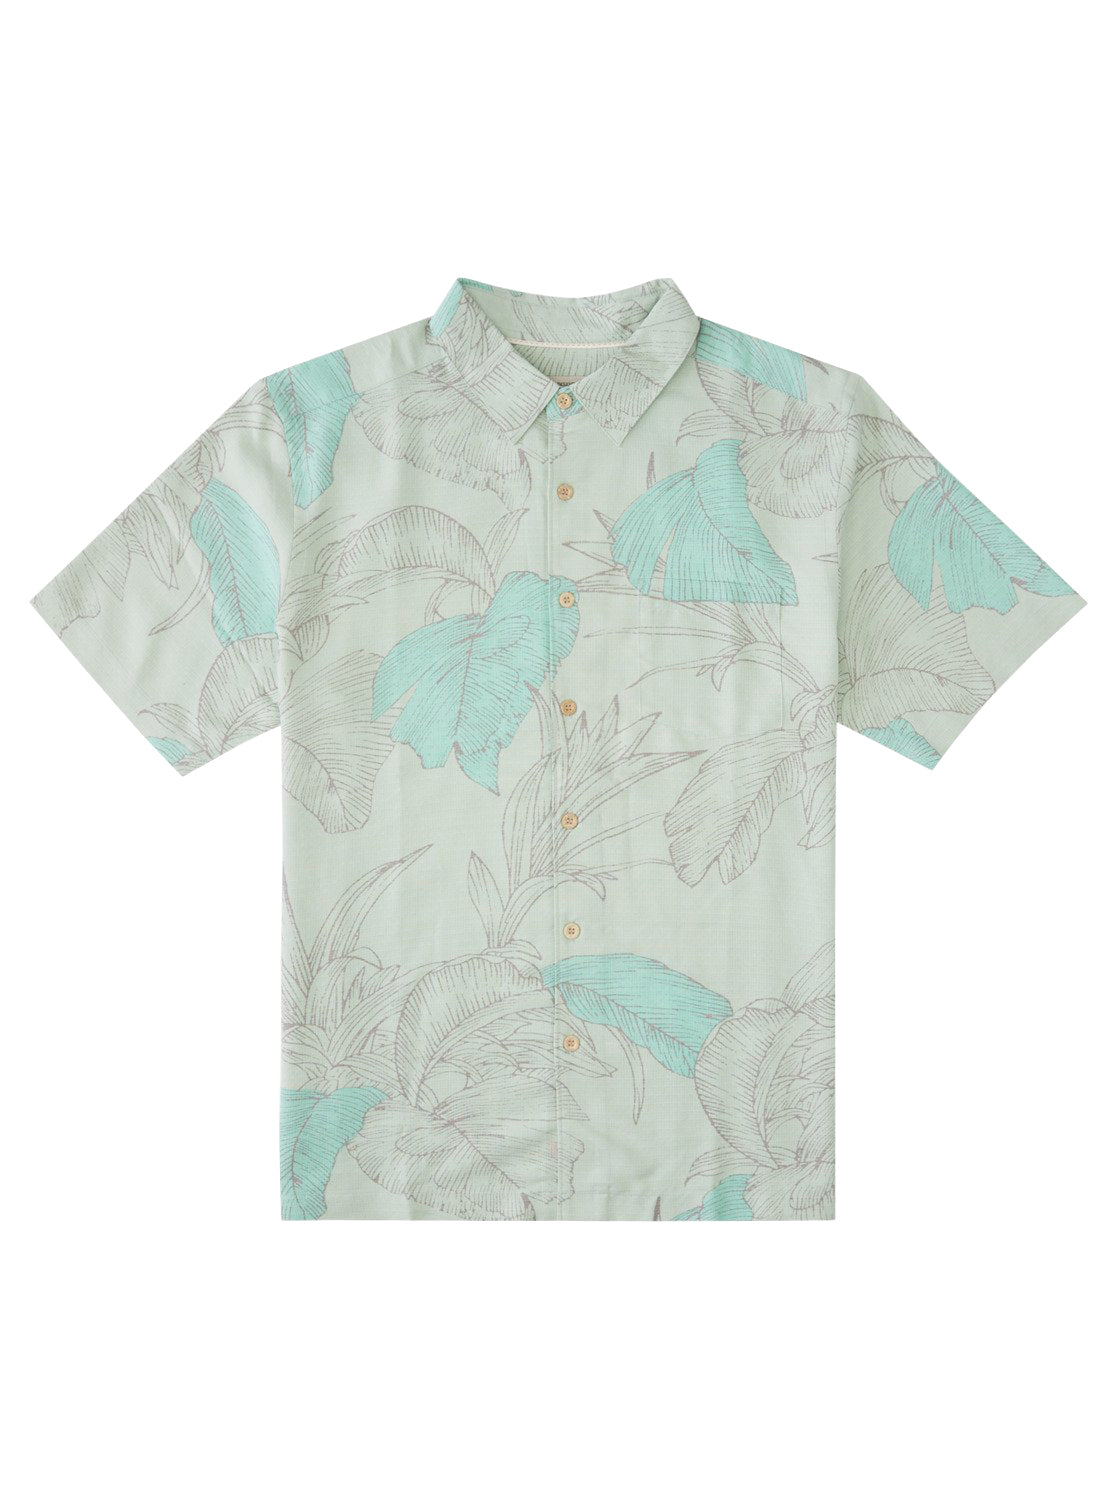 Quiksilver Jungle Island SS Woven GDG6 S